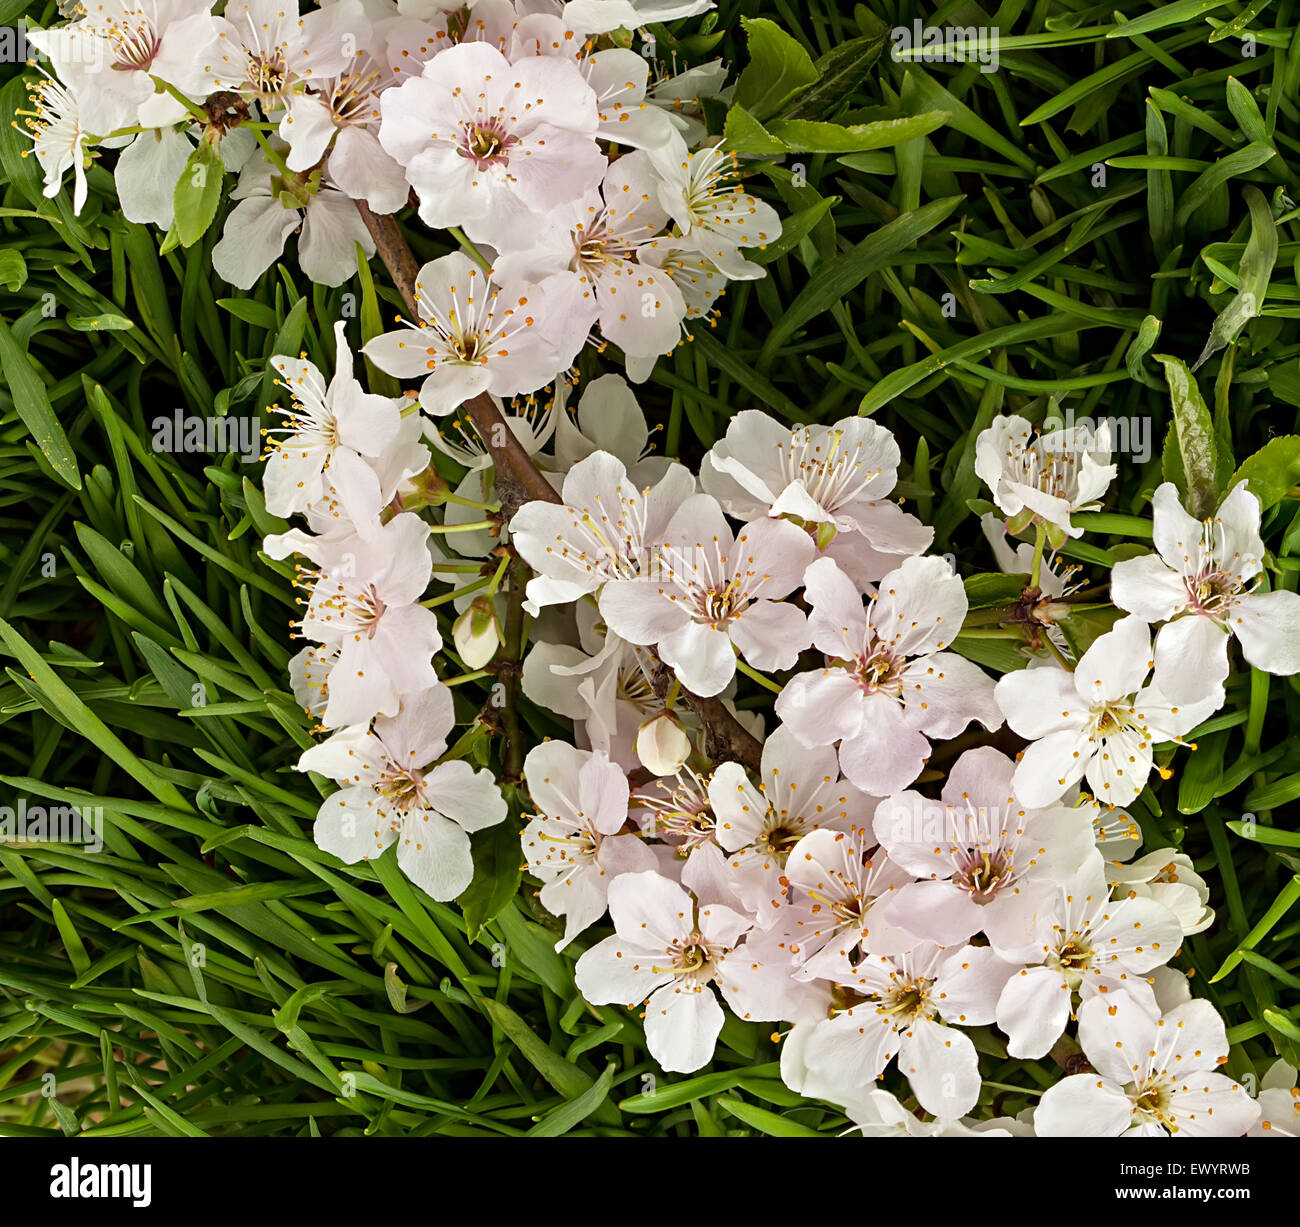 Green grass with blooming apple tree branch Stock Photo